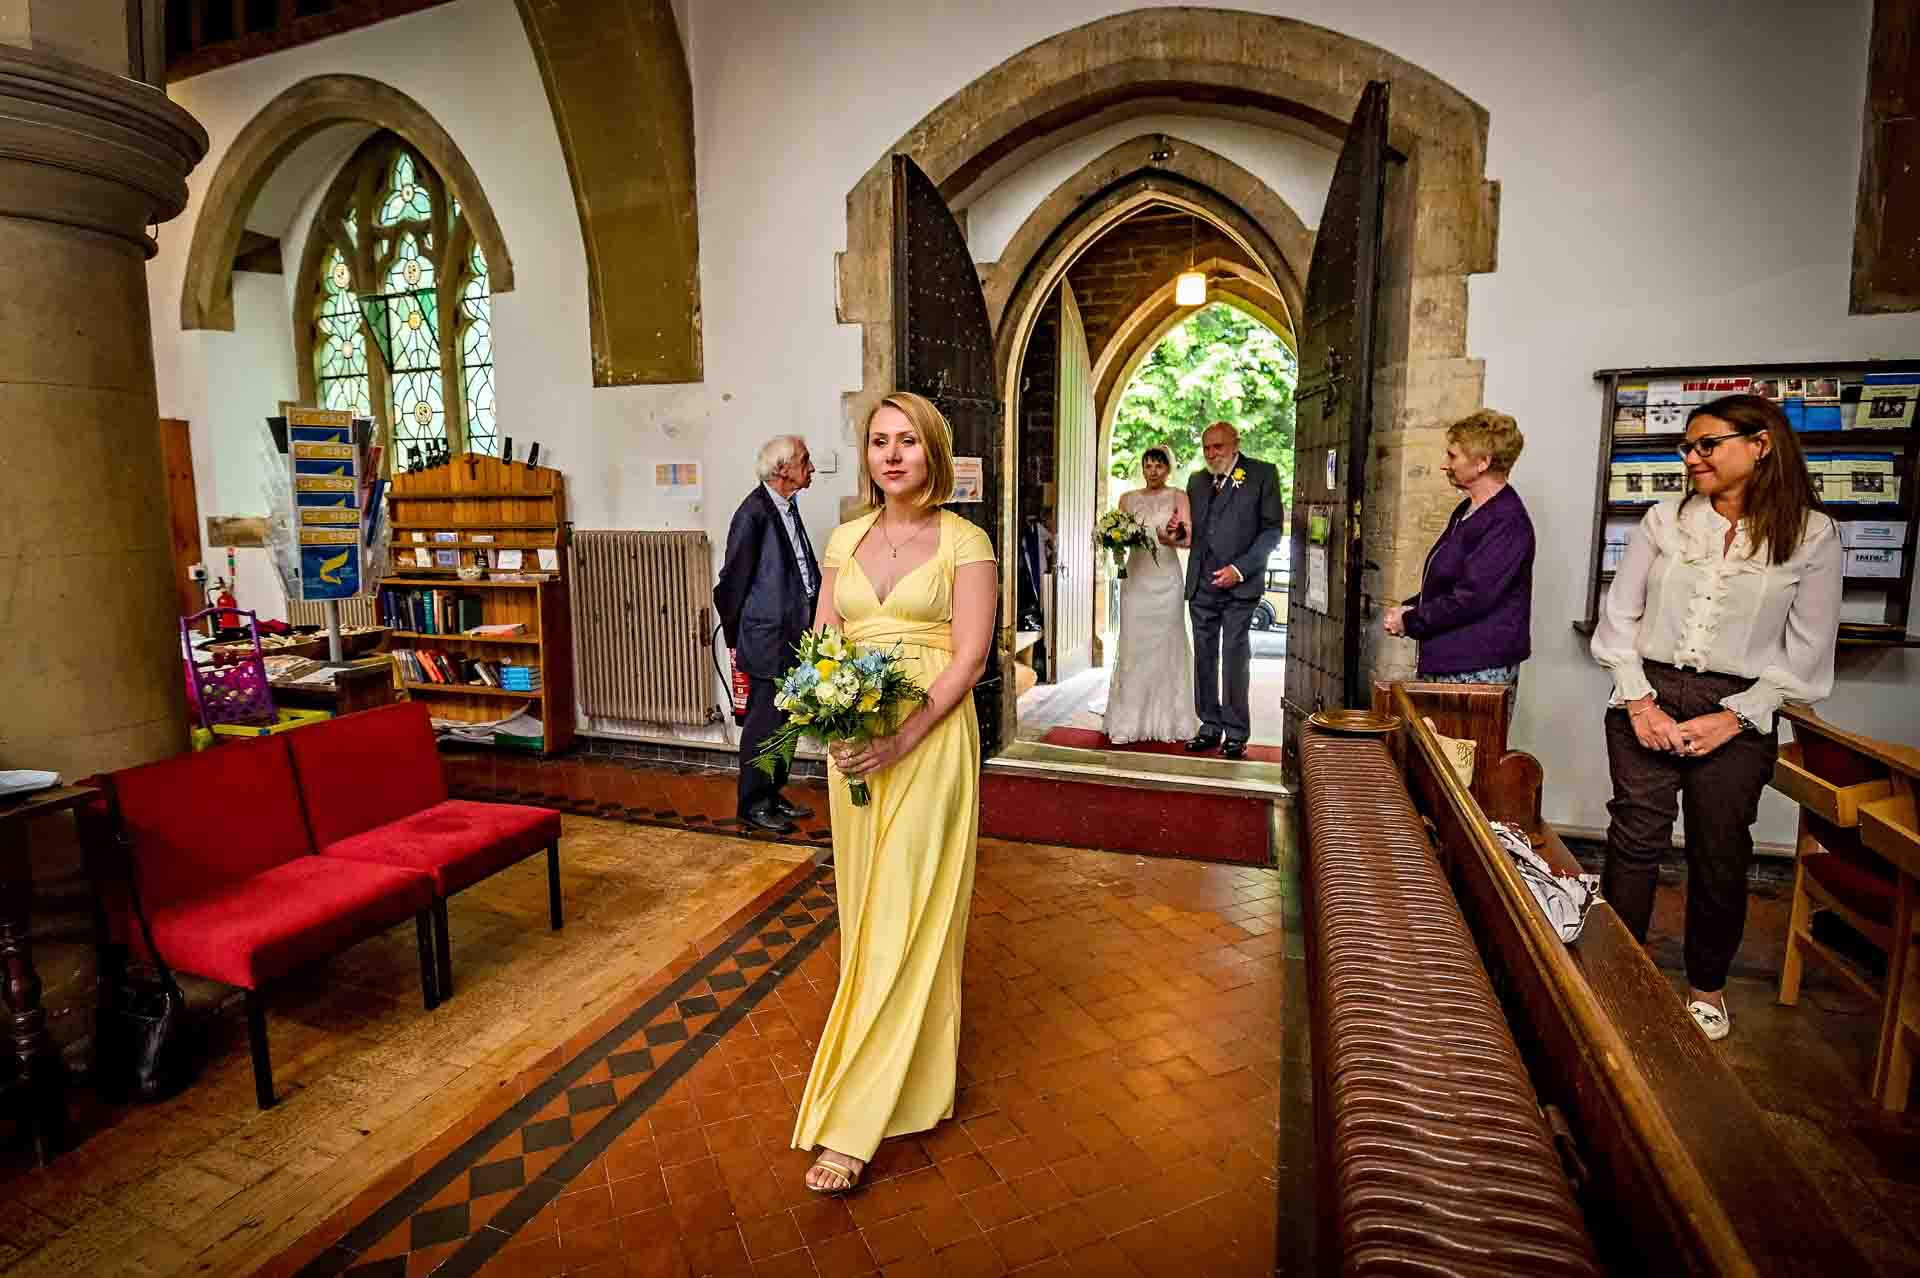 Bridesmaid leading bridal procession at St Martins Church wedding in Caerphilly